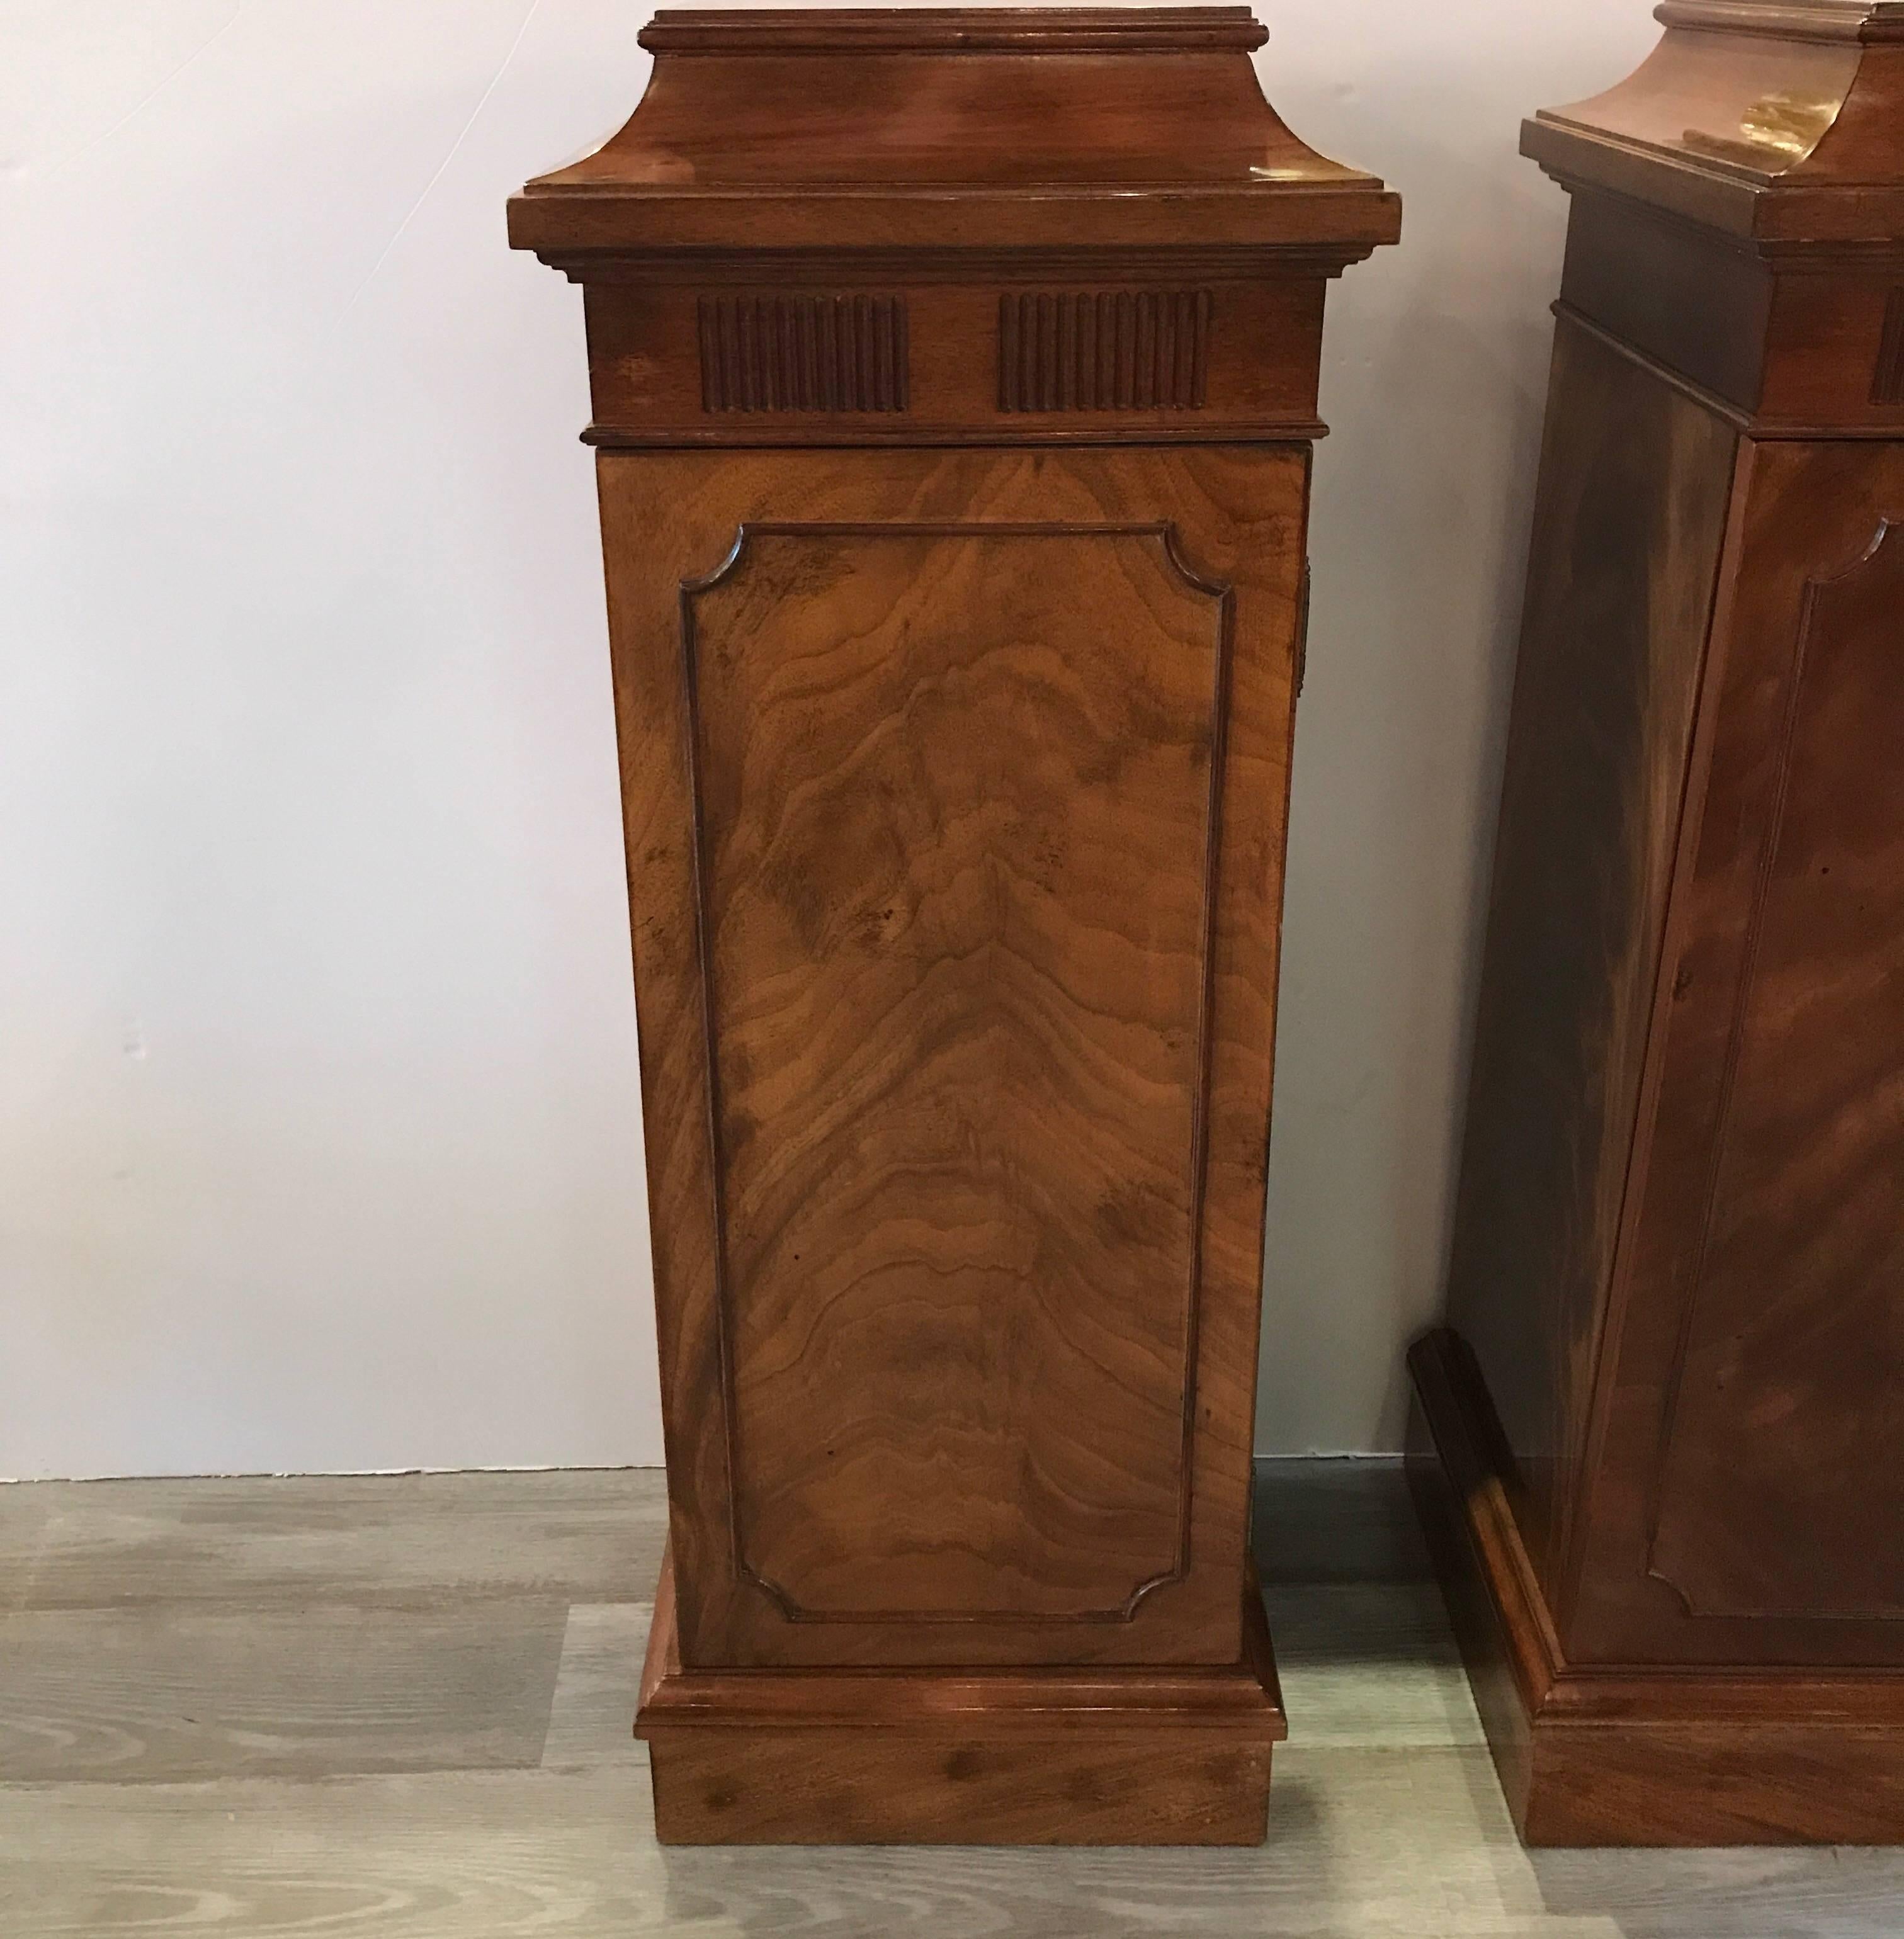 A fine pair of flame mahogany storage pedestals. The concealed front door opens to reveal a generous storage compartment. The tops with nicely caved and coffered detail. These are nice cabinetmaker pieces from circa 1950.